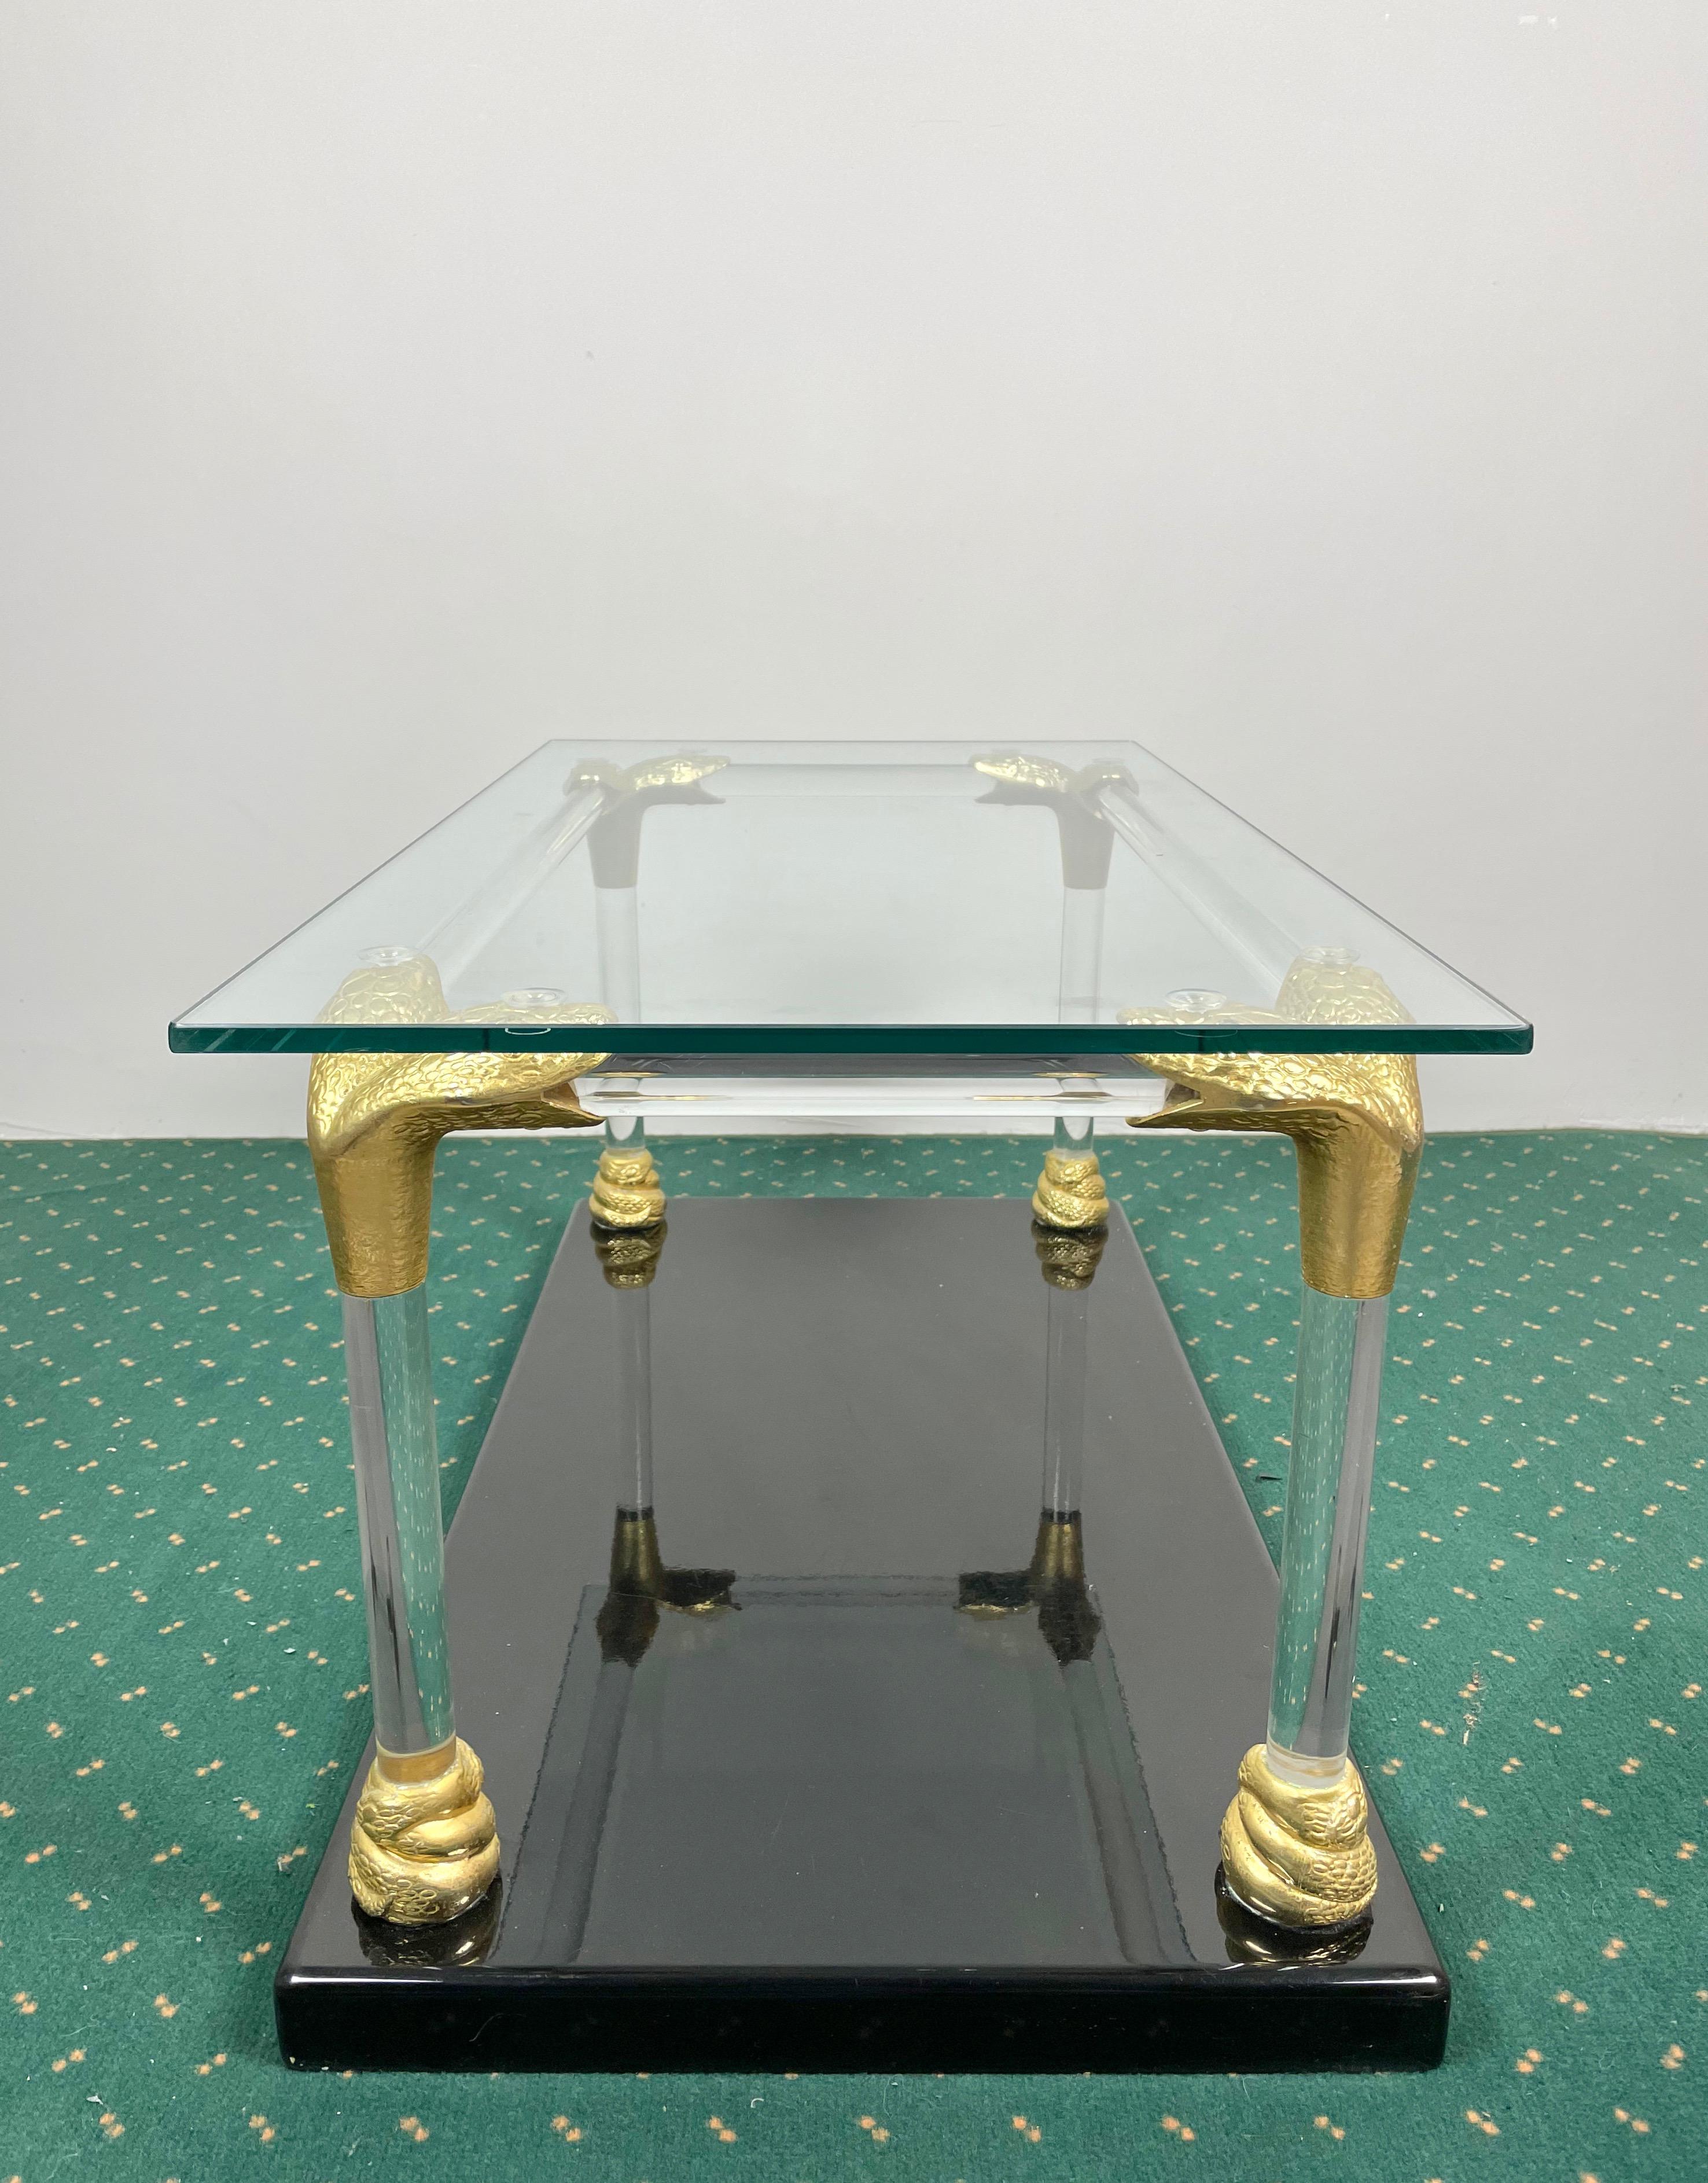 Mid-Century Modern Lucite, Wood and Brass Coffee Table with Snake Head Details, Italy, 1970s For Sale